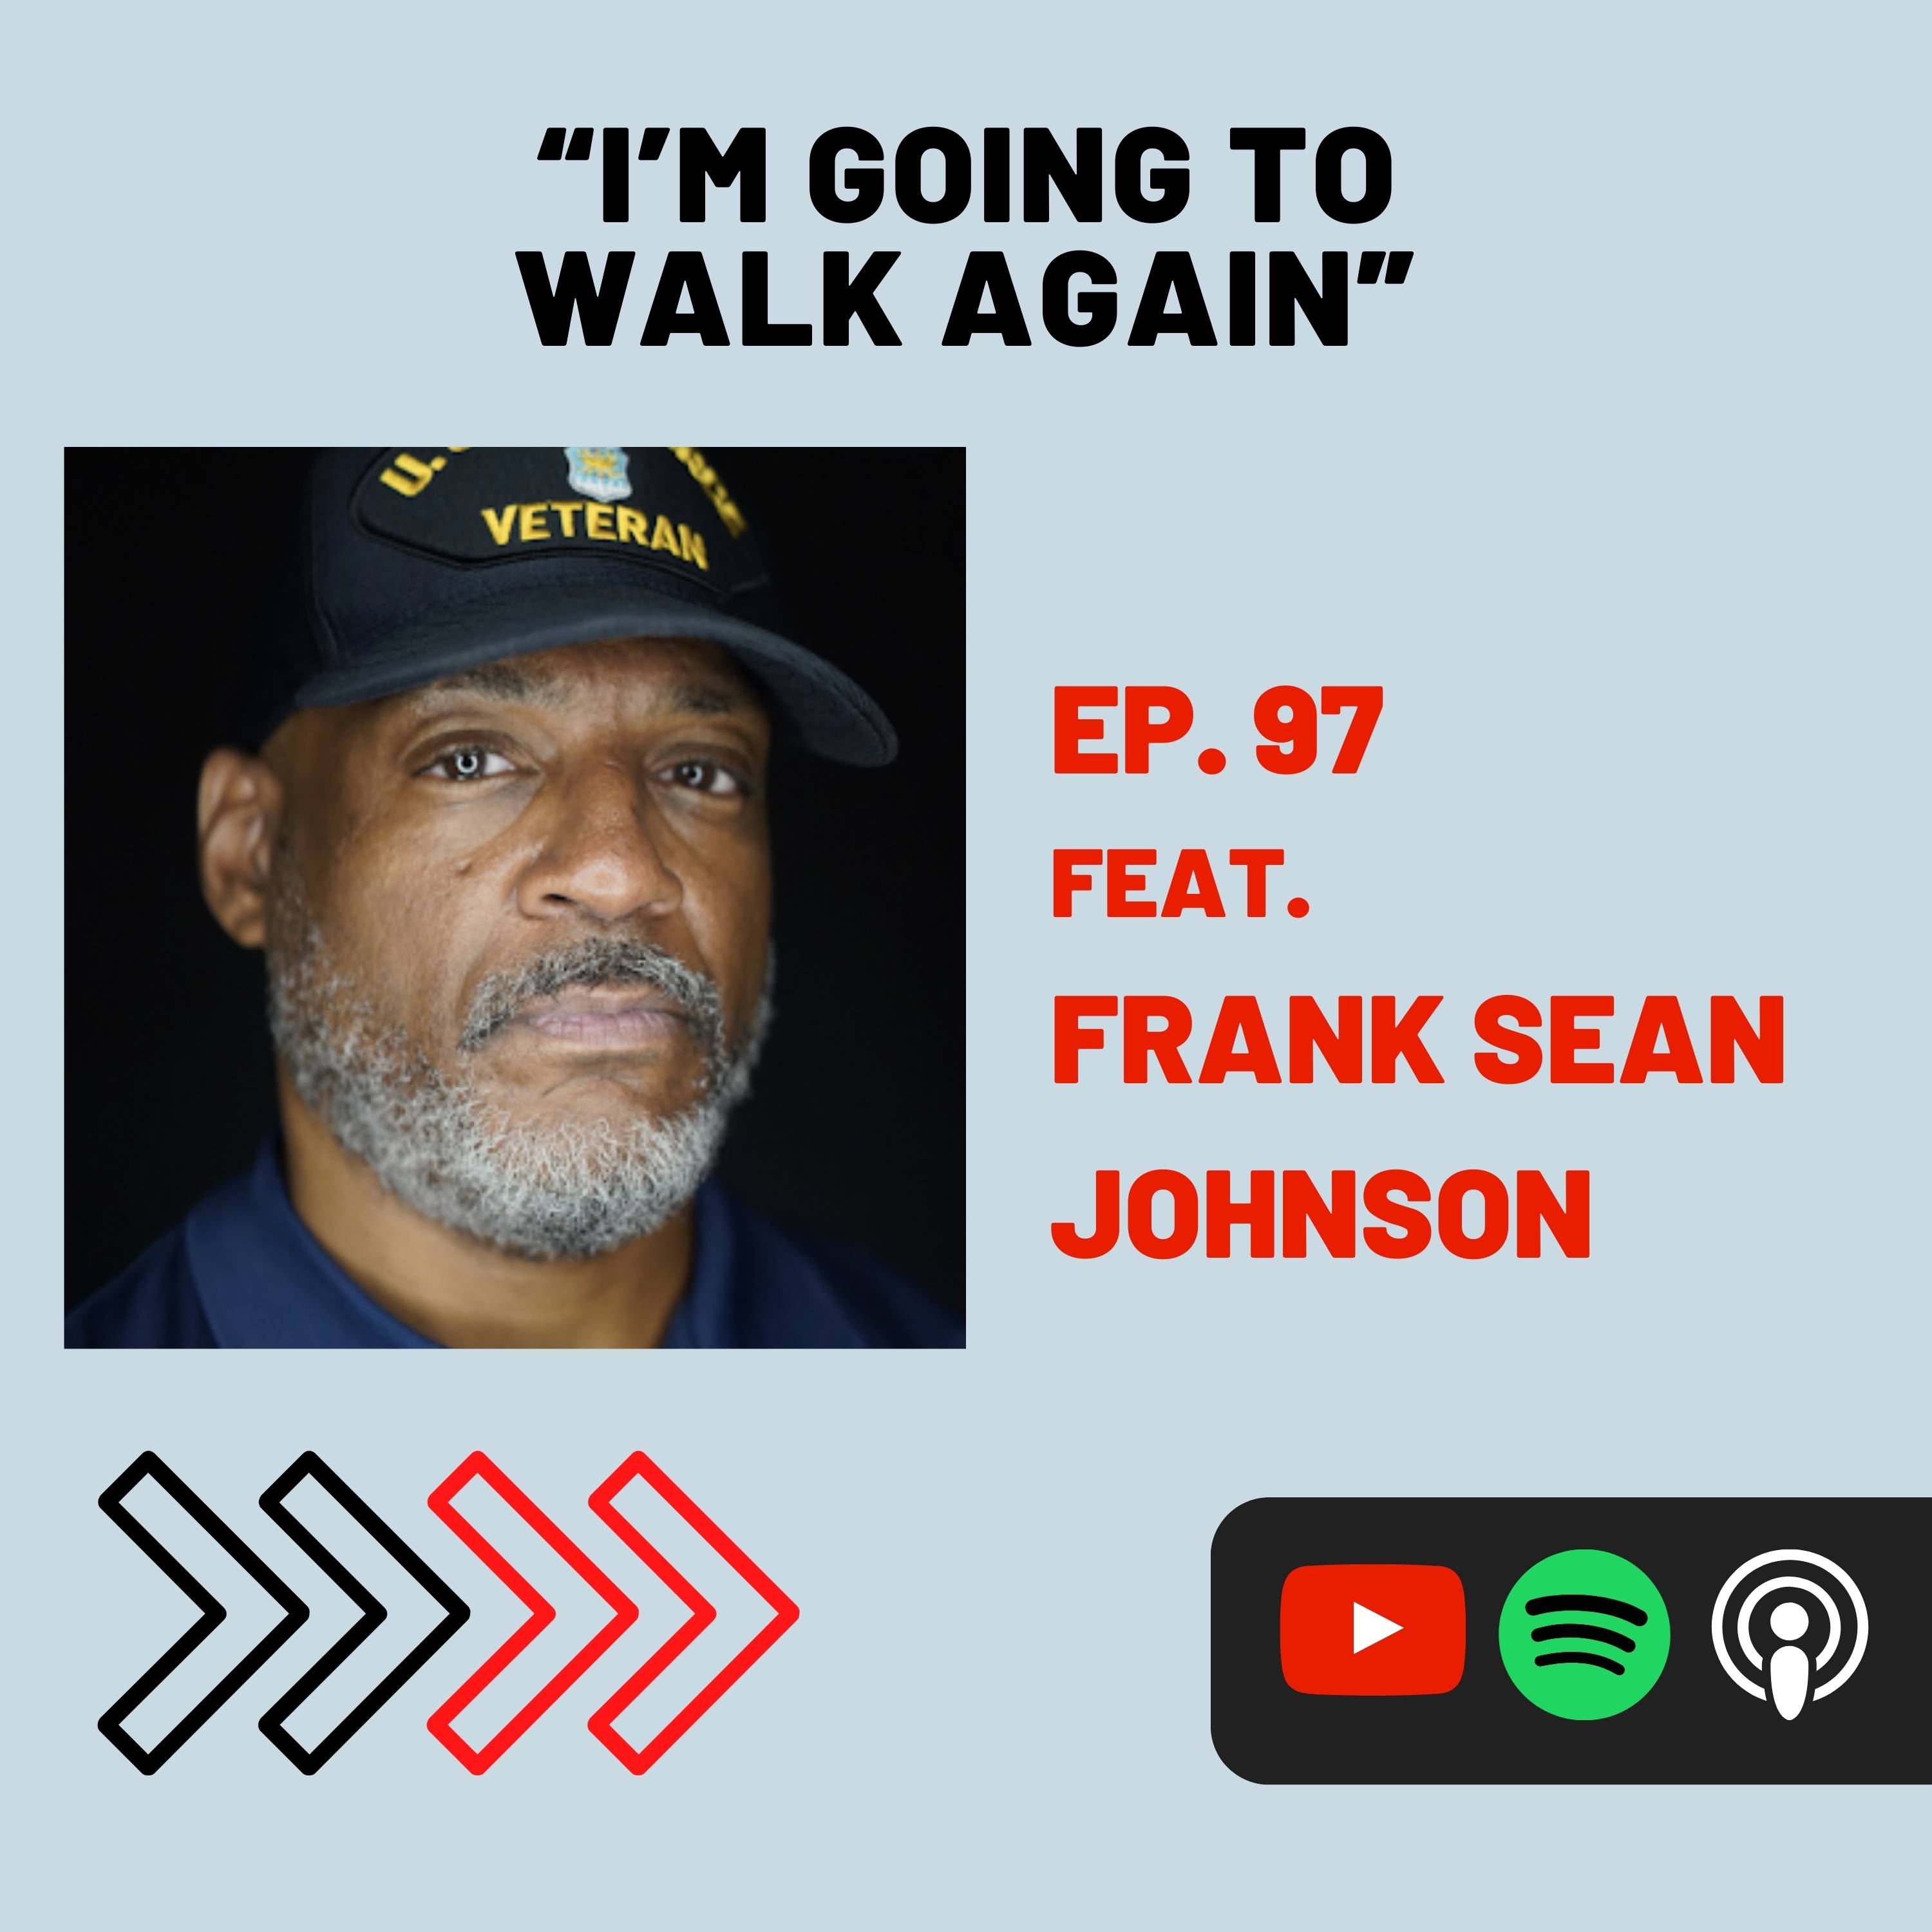 Doctors Said He’d Never Walk Again But Frank Sean Johnson & God Had Other Plans